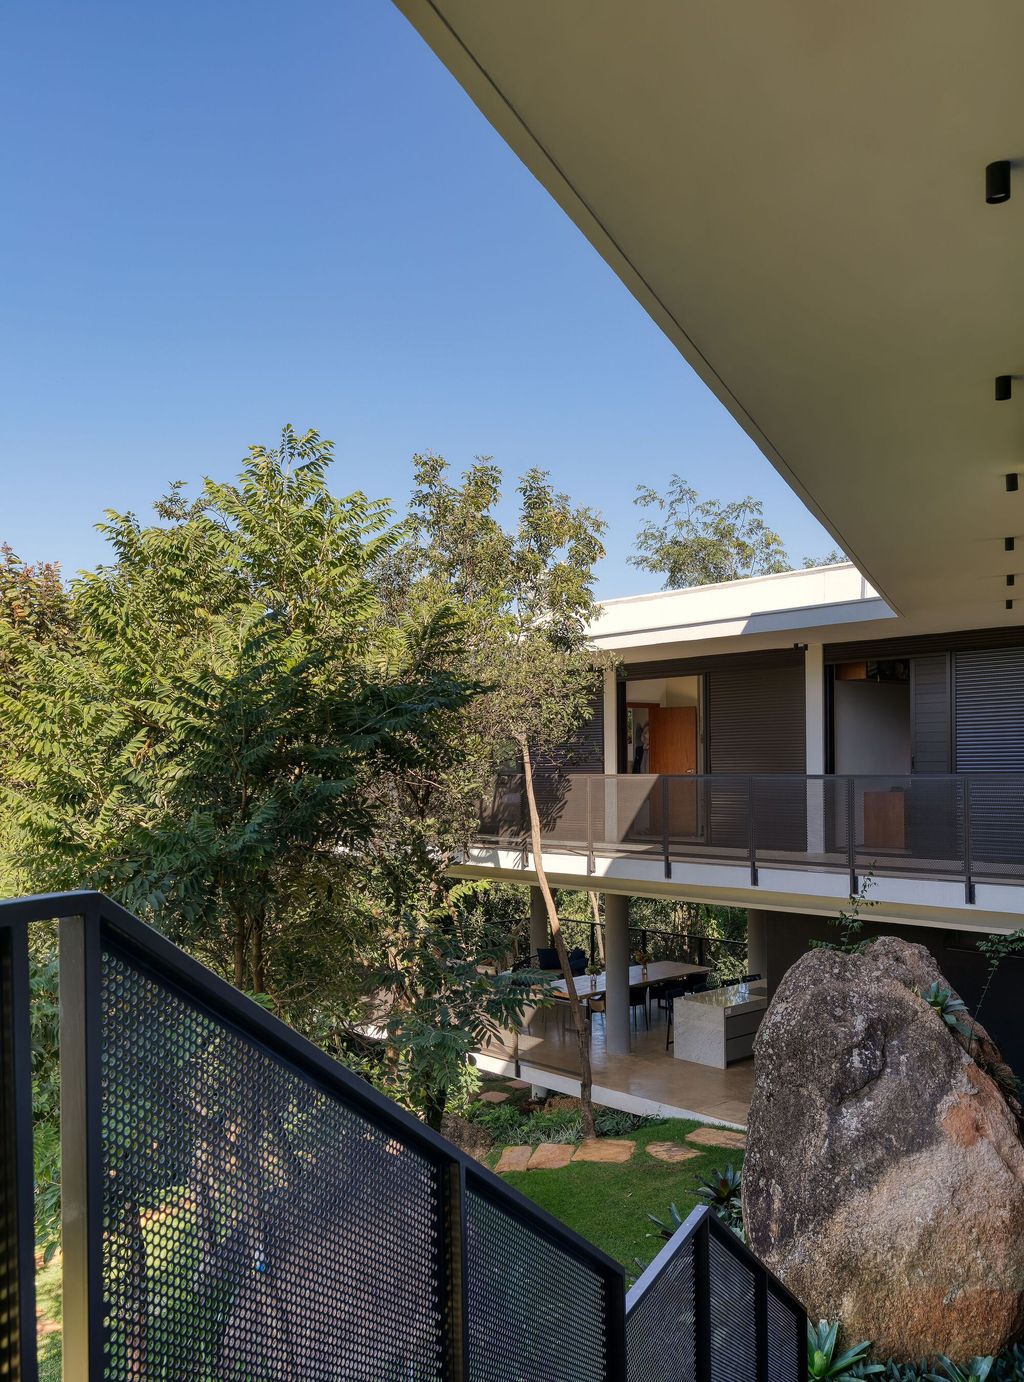 House-of-Stones-with-Stunning-Views-among-Nature-by-TETRO-Arquitetura-9